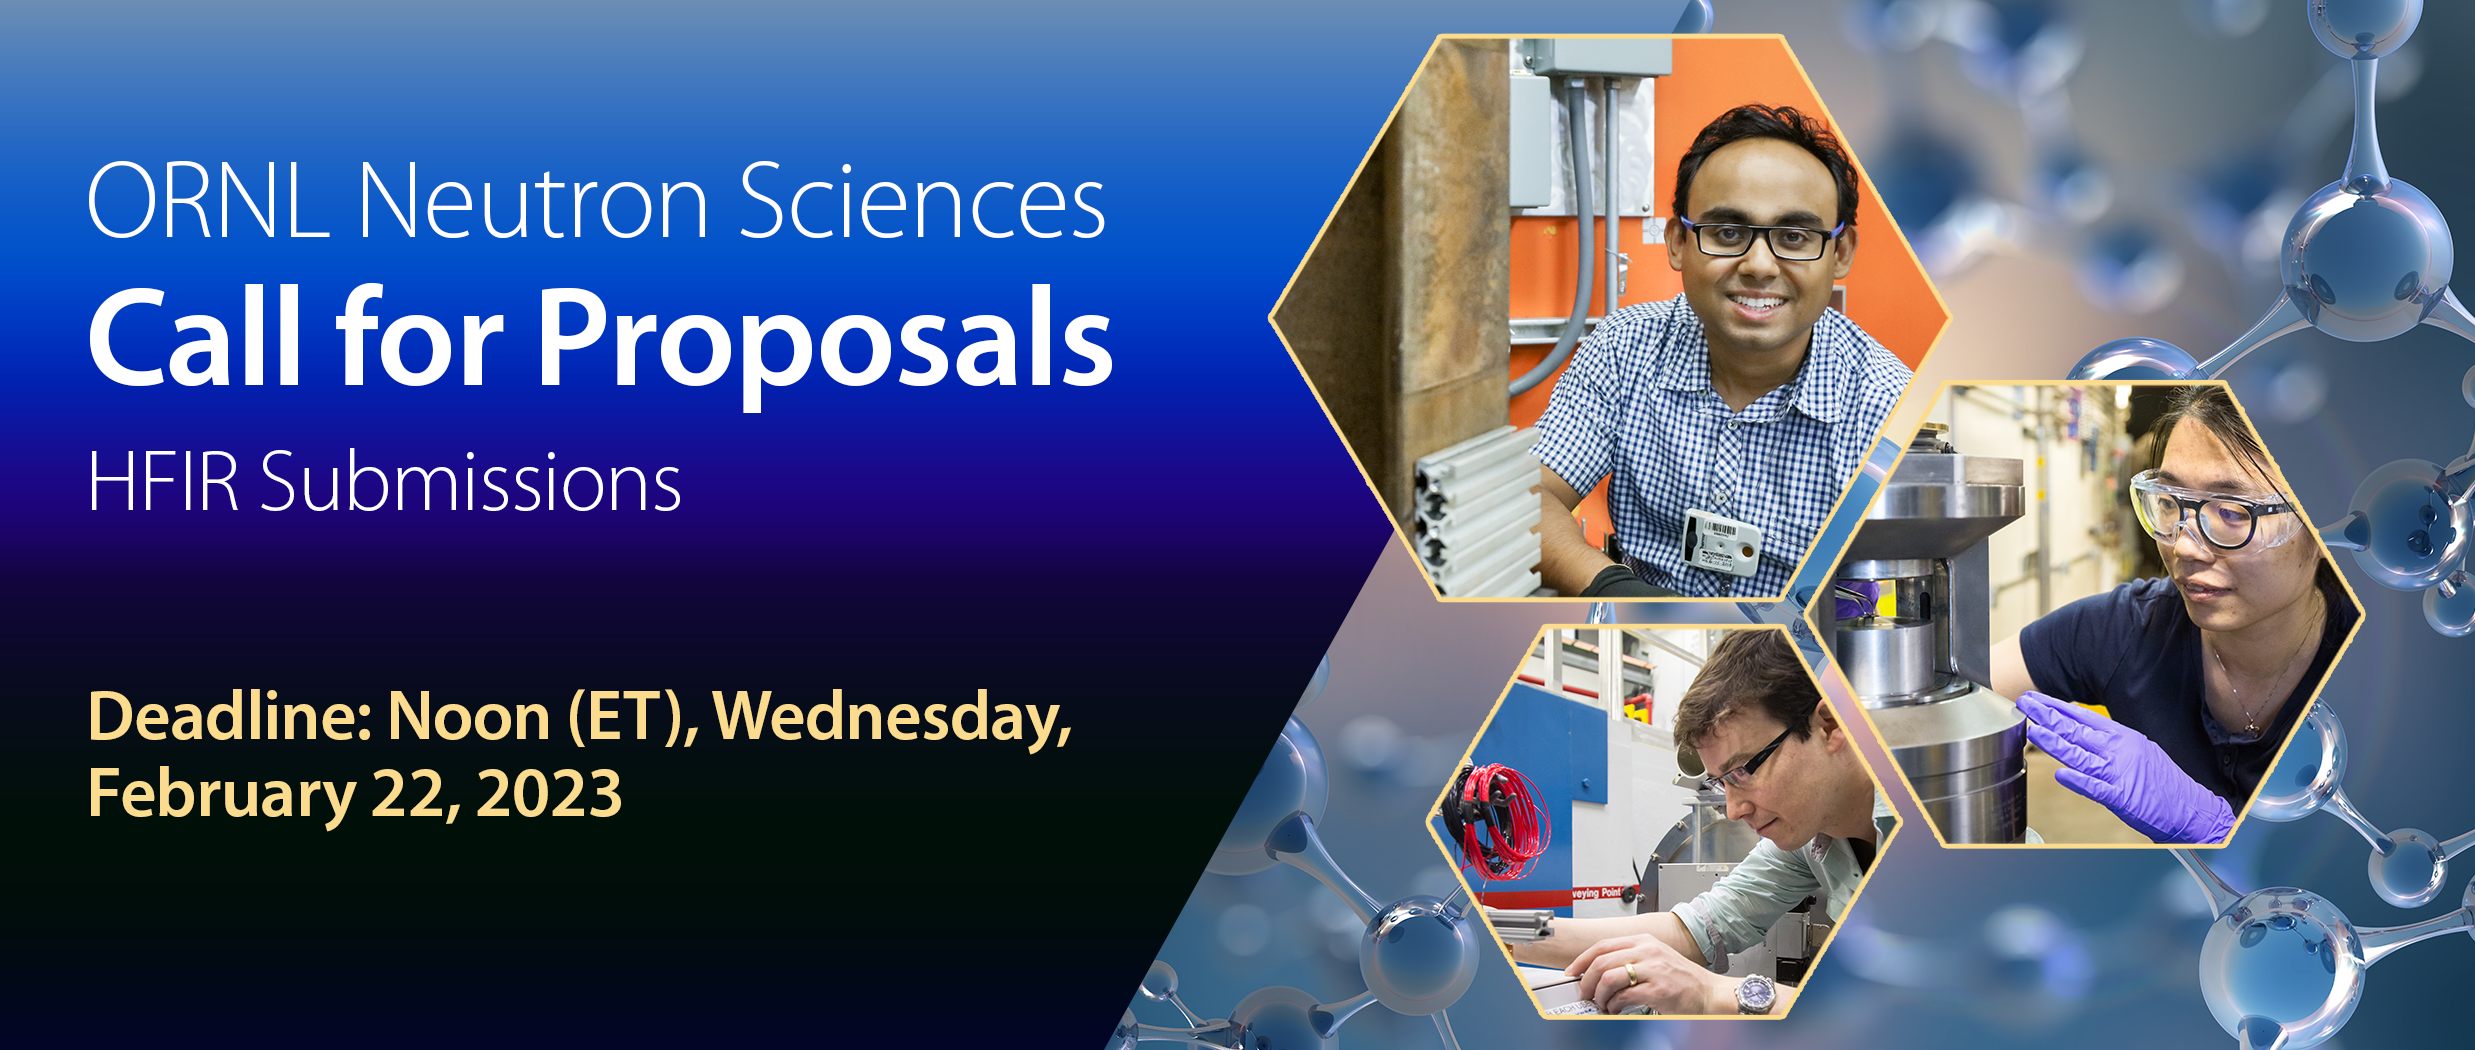 ORNL Neutron Sciences Call for Proposals 2023-B Deadline: Noon (Eastern Time), Wednesday, February 22, 2023